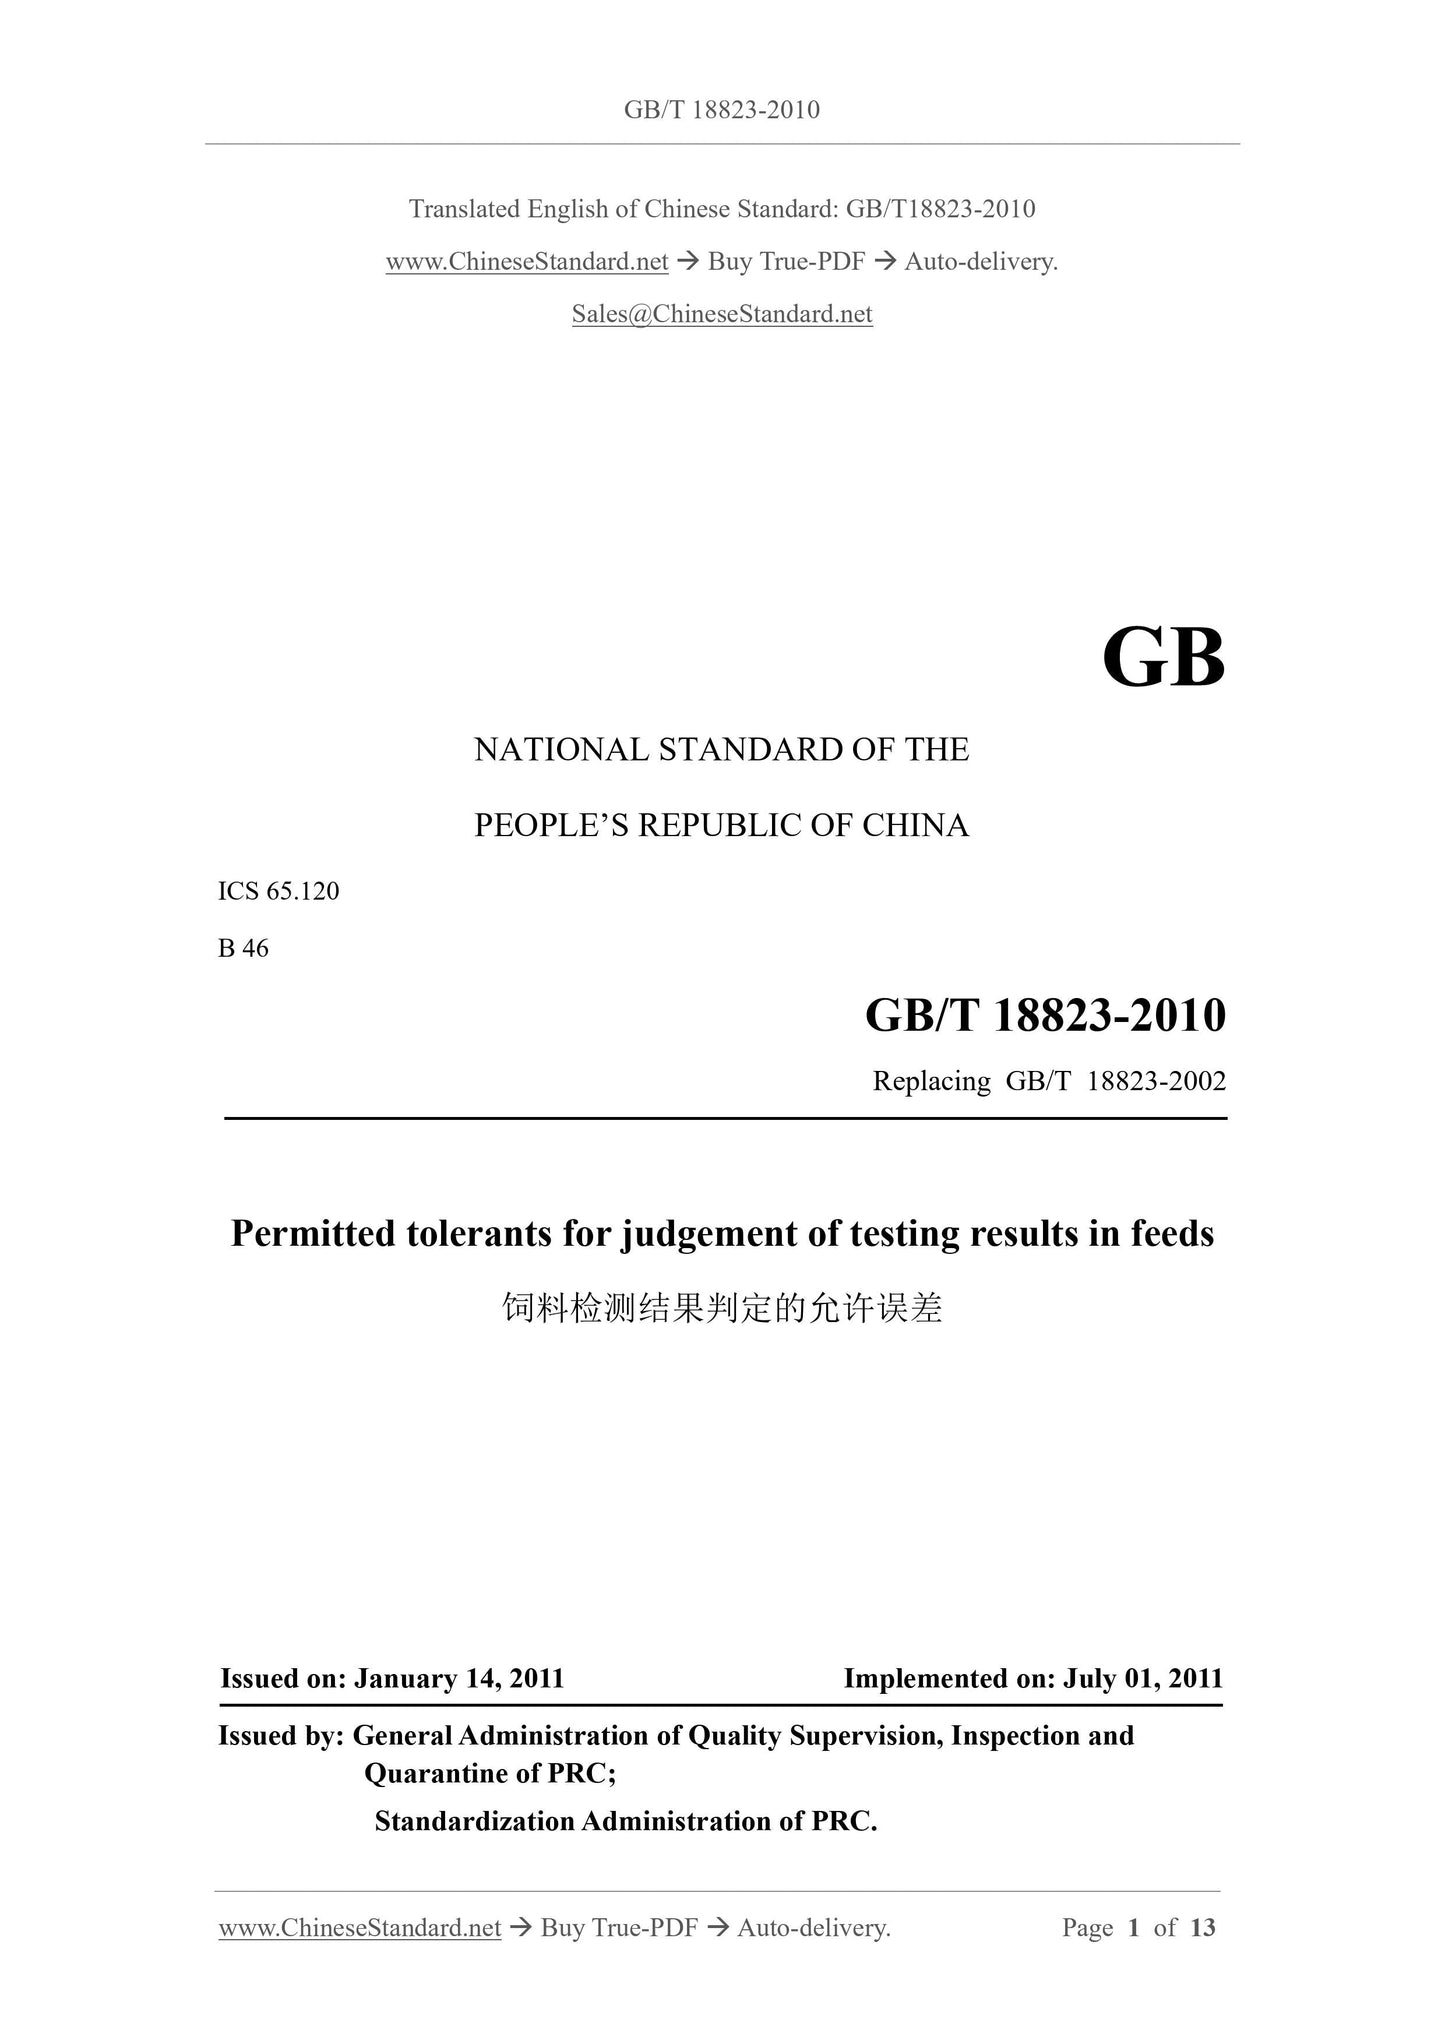 GB/T 18823-2010 Page 1